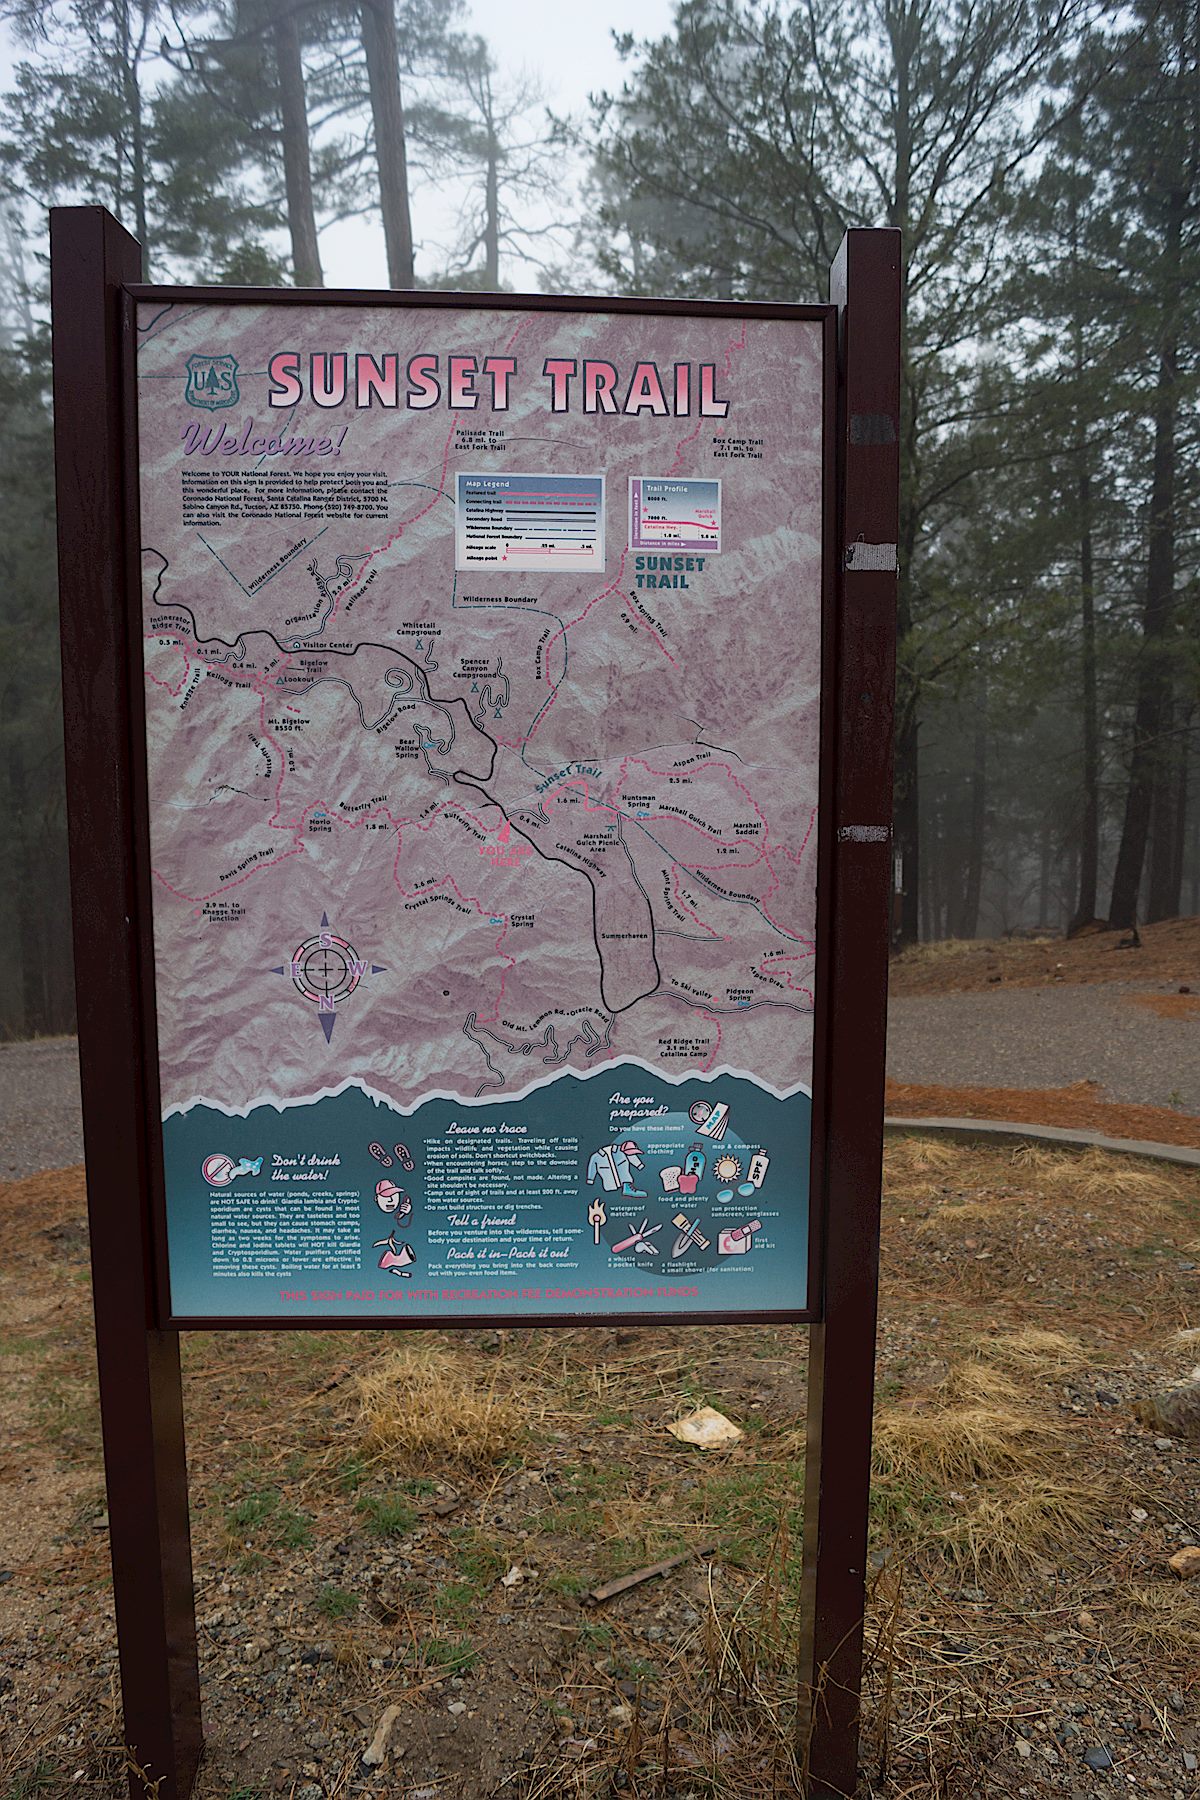 Sunset Trail Trail Map sign. March 2014.